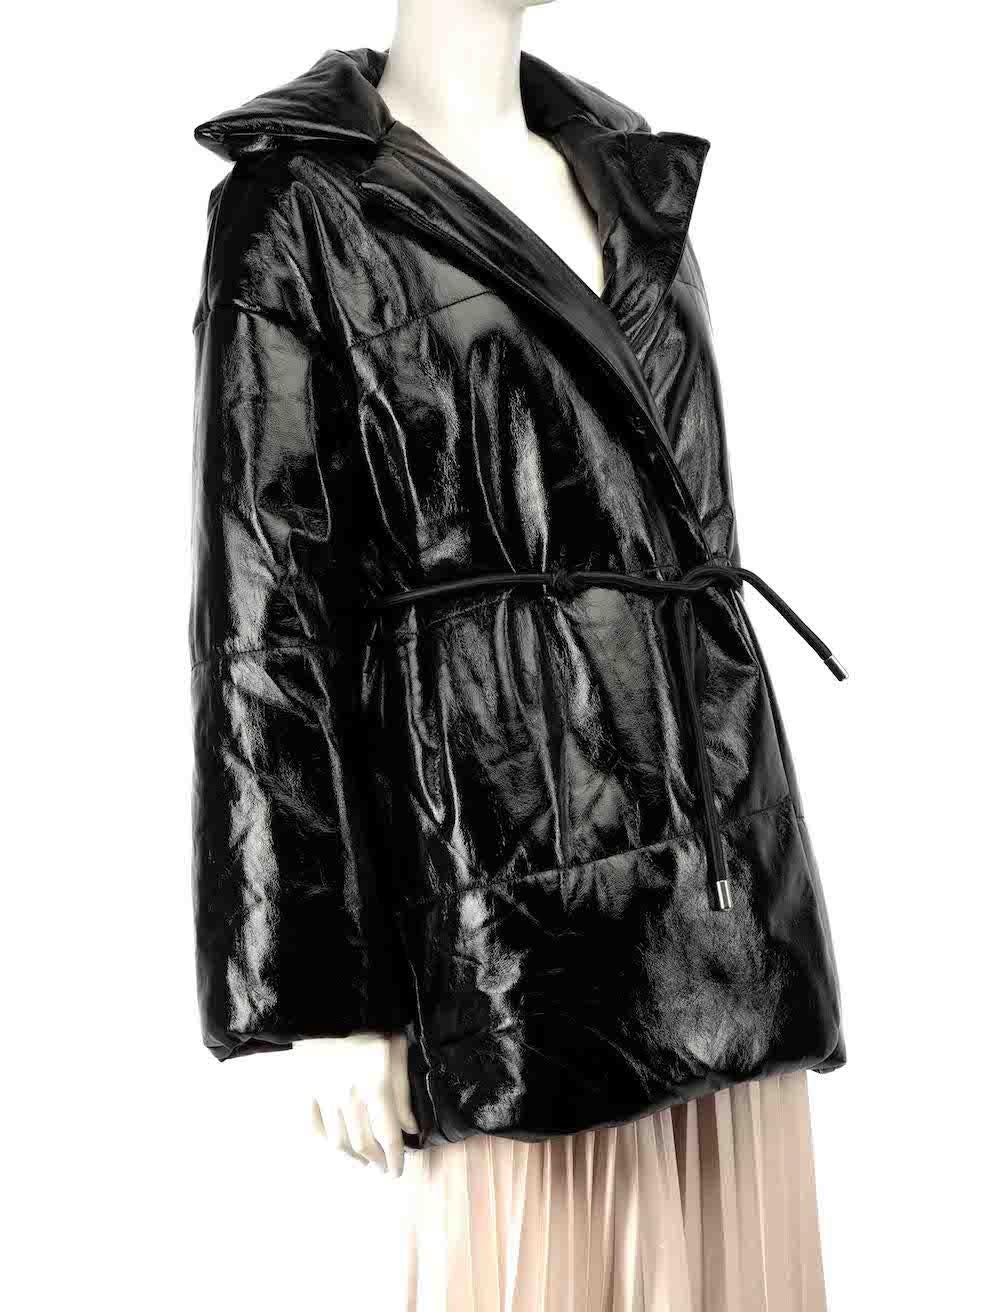 CONDITION is Very good. Hardly any visible wear to coat is evident on this used Proenza Schouler designer resale item.
 
 
 
 Details
 
 
 Black
 
 Synthetic
 
 Puffer coat
 
 Glossed accent
 
 Front snap button closure
 
 2x Front side pockets
 
 
